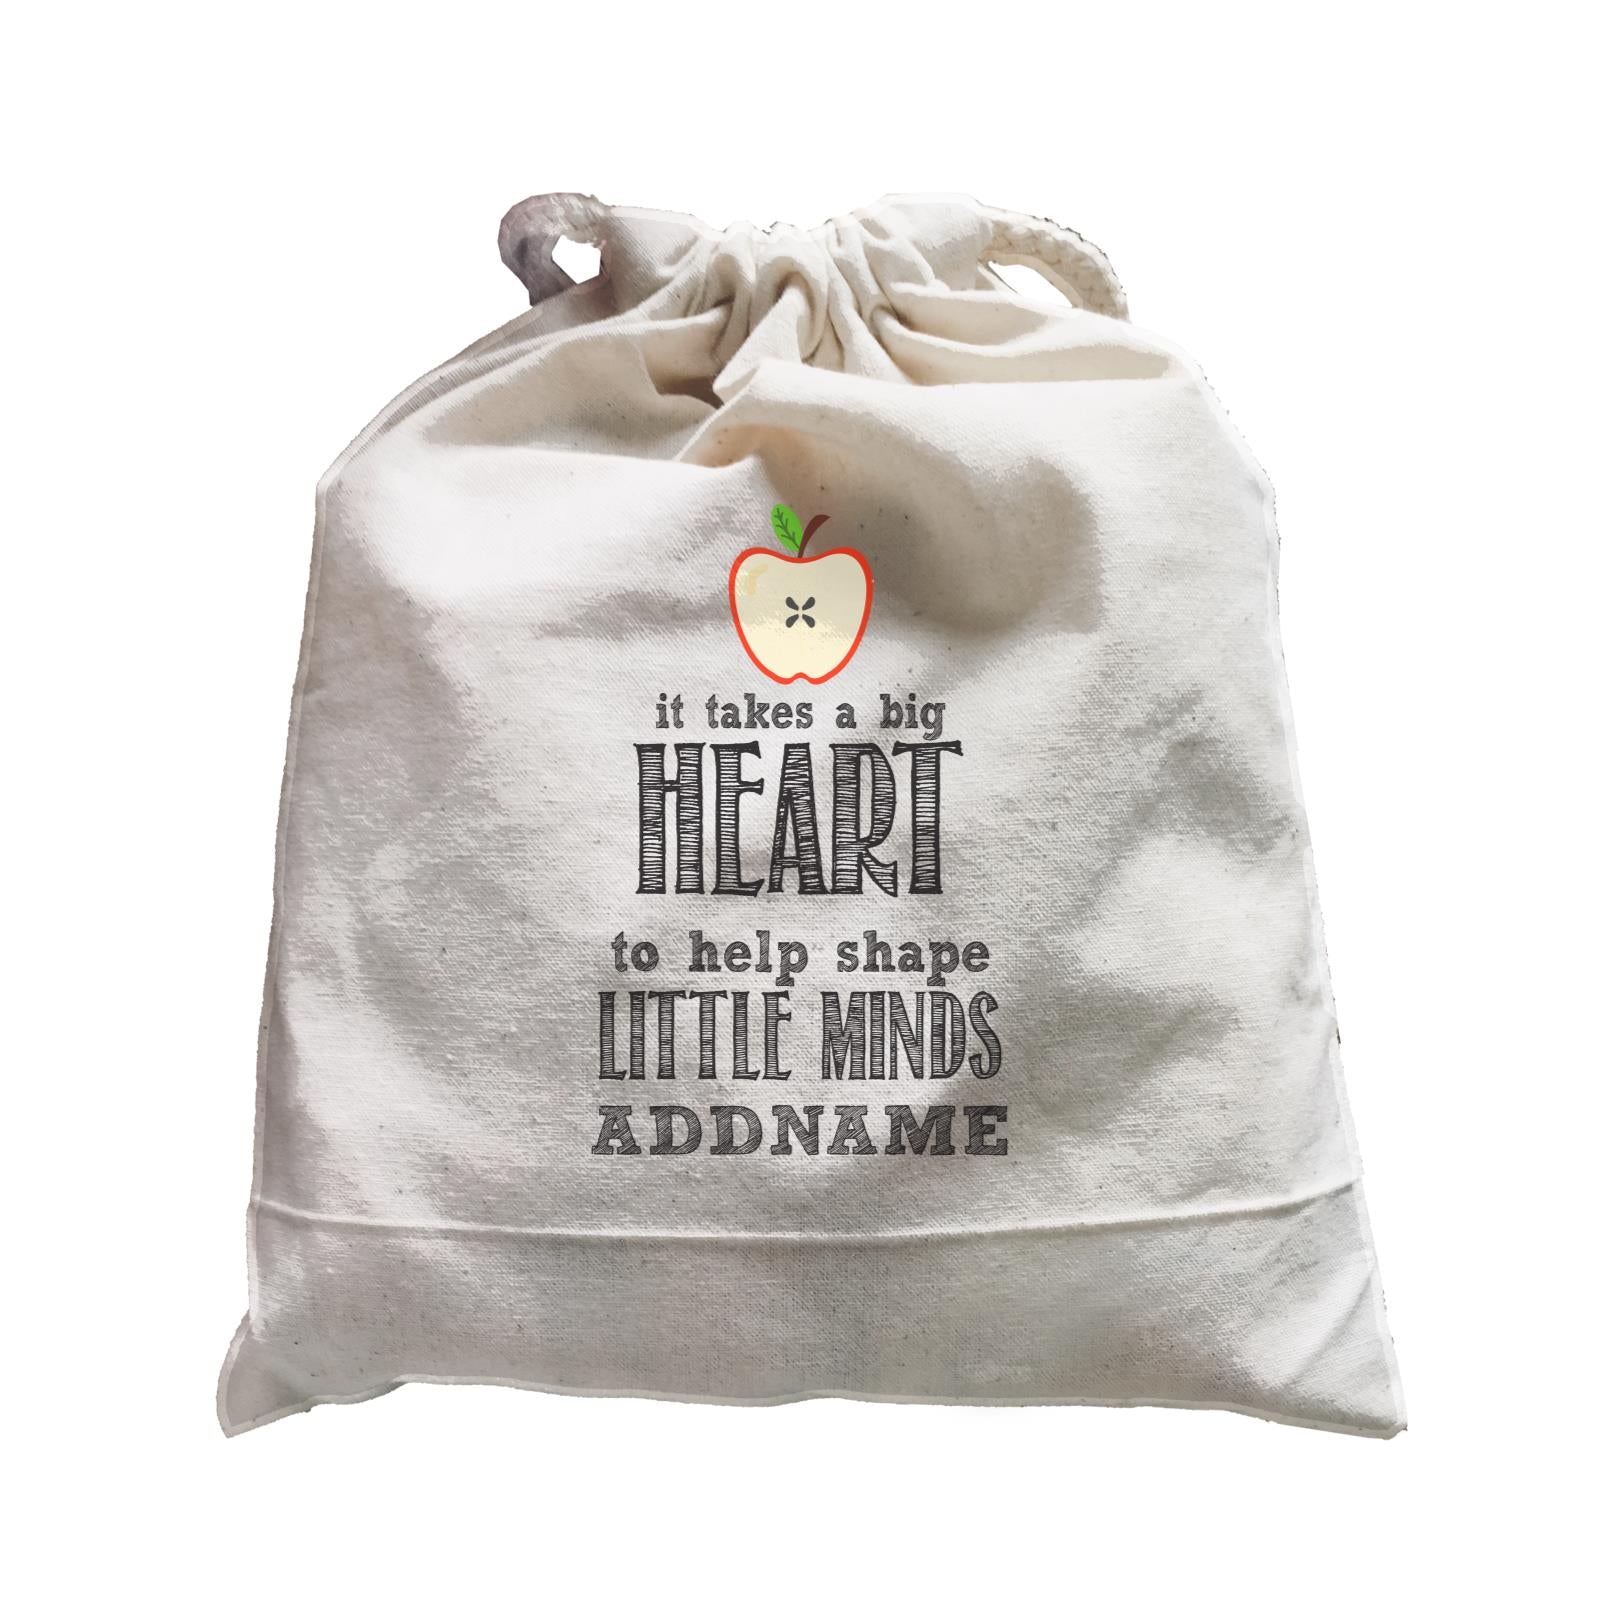 Inspiration Quotes Apple It Takes A Big Heart To Help Shape Little Minds Addname Satchel